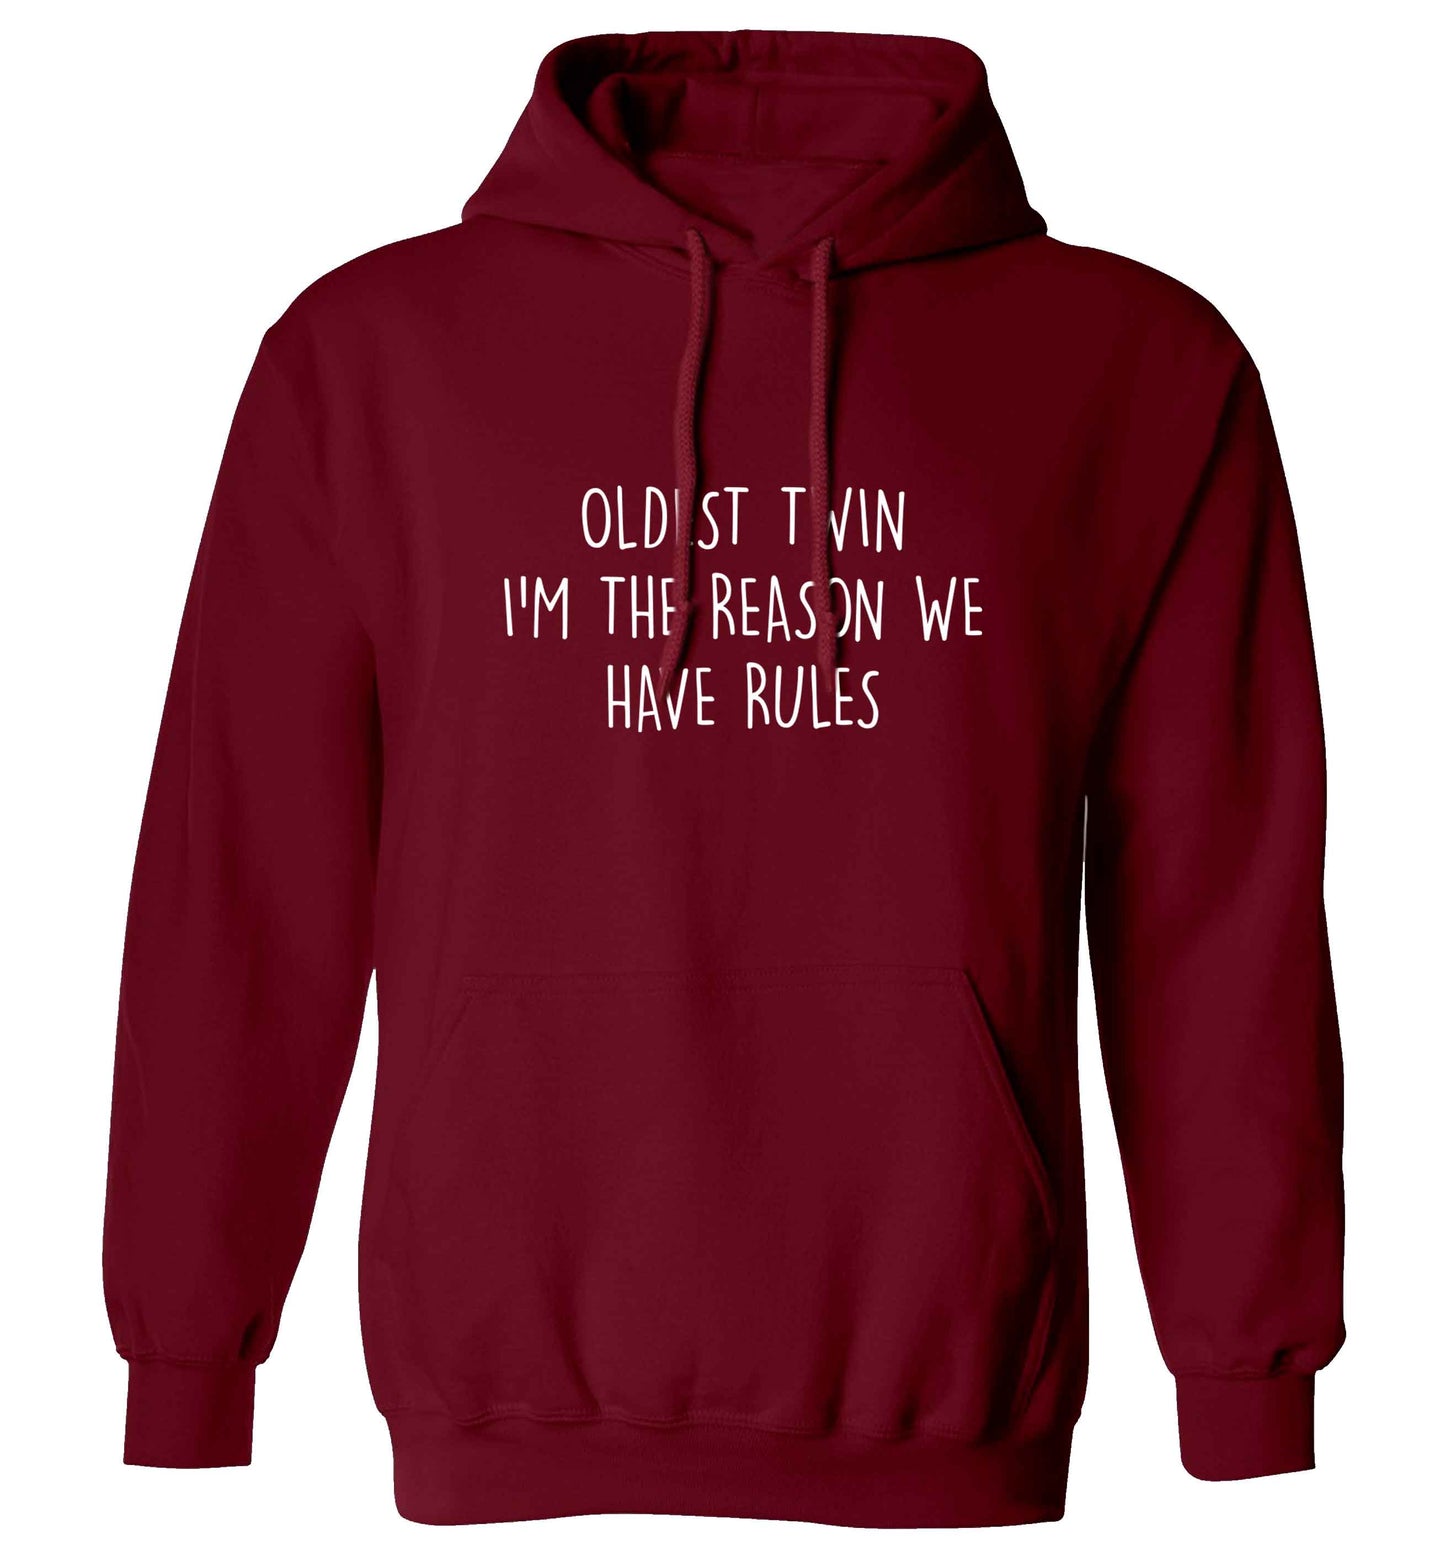 Oldest twin I'm the reason we have rules adults unisex maroon hoodie 2XL